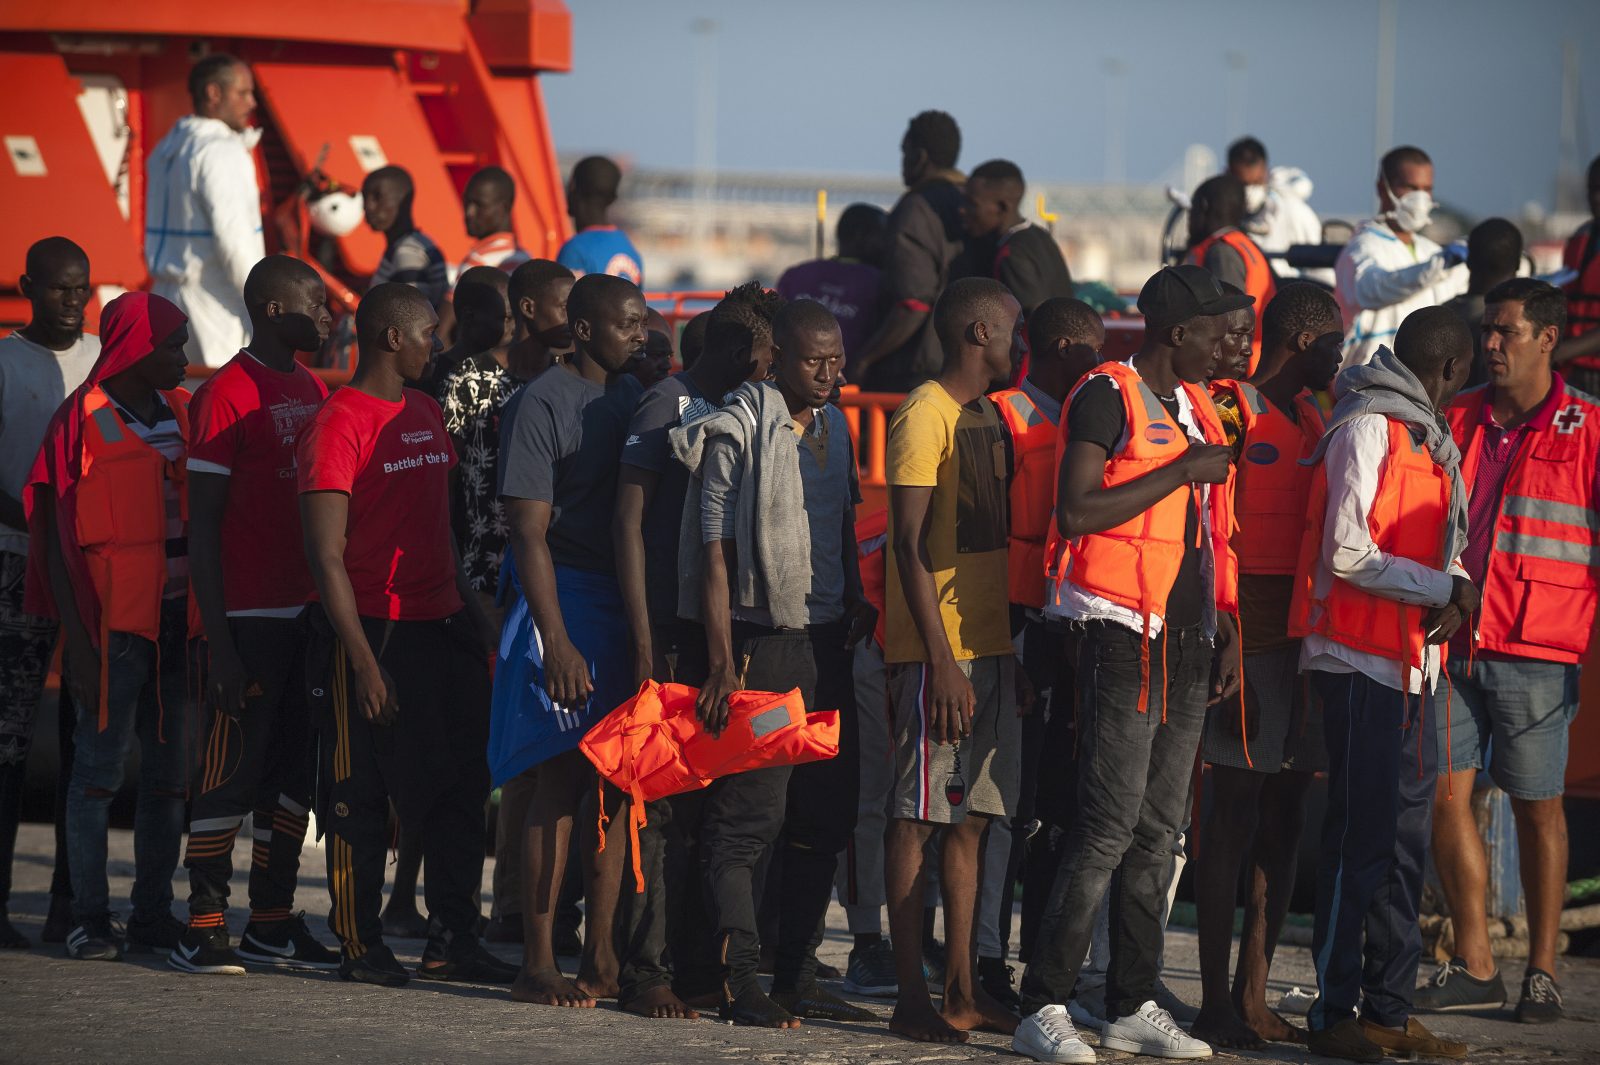 121 migrants rescued at port Malaga, Spain - 21 Sept 2018